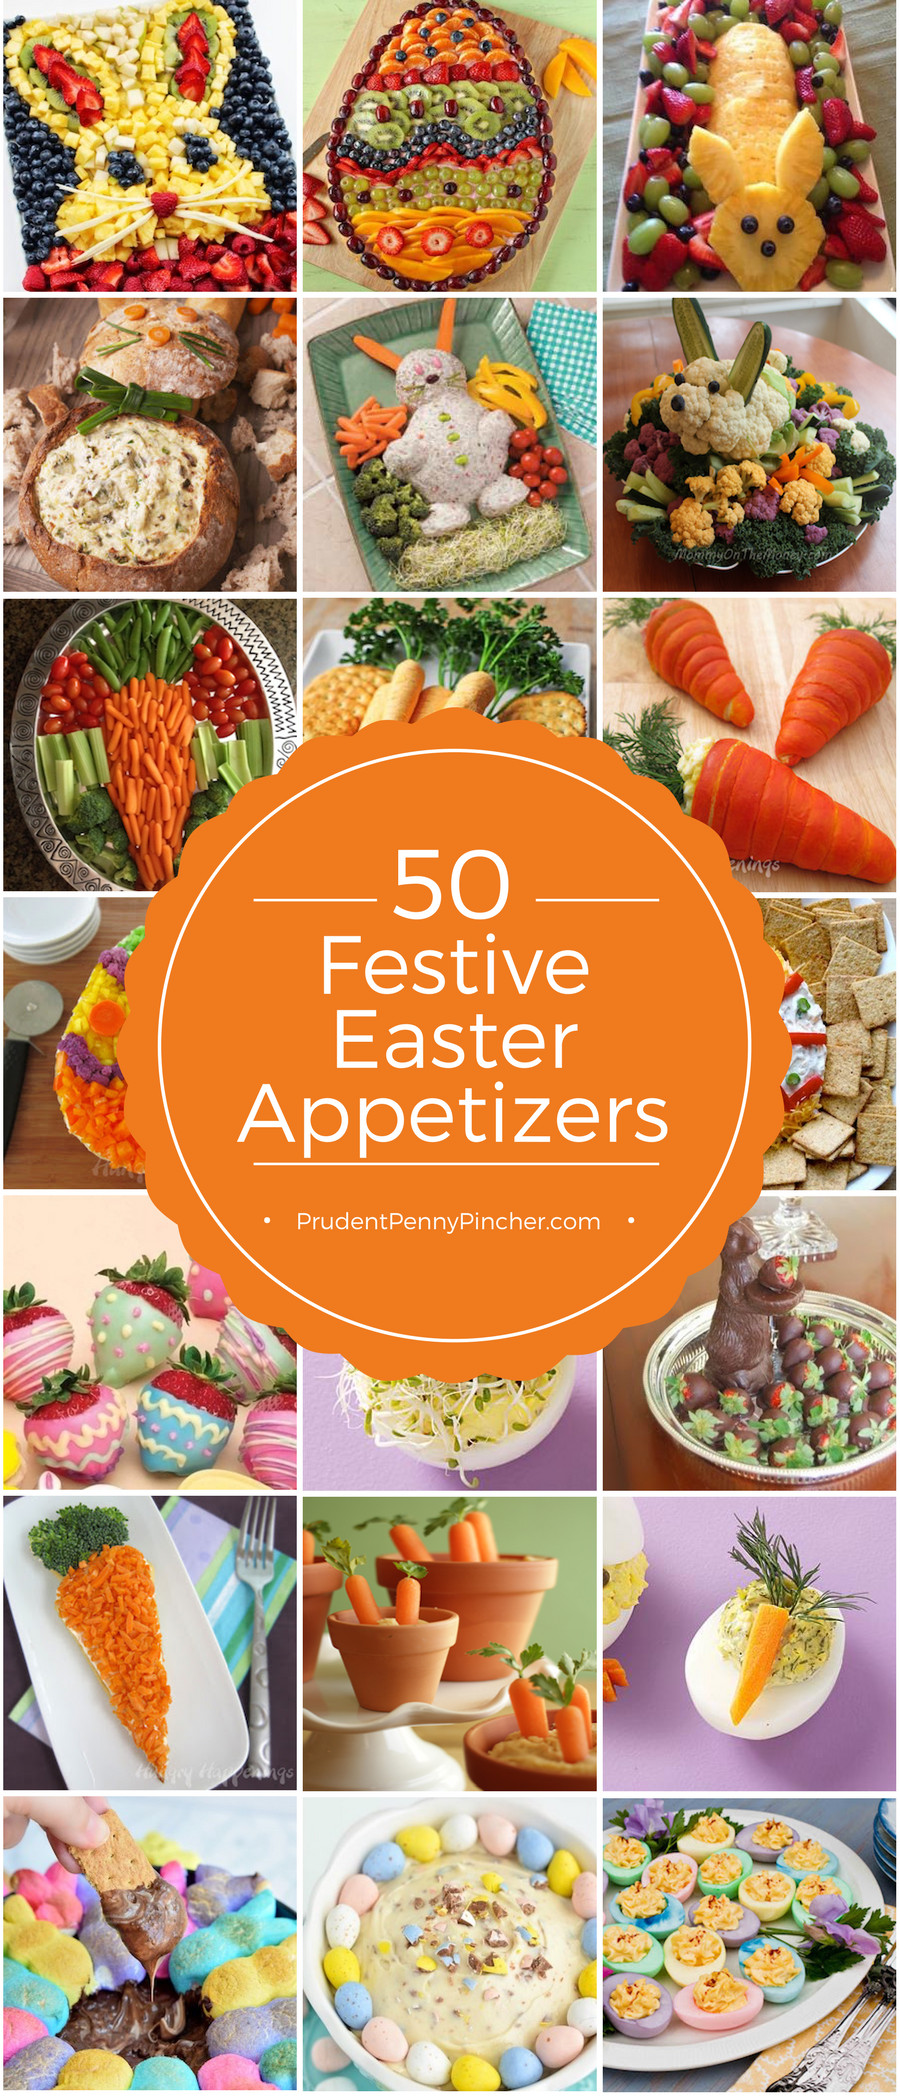 Appetizers For Easter Dinner Ideas
 50 Festive Easter Appetizers Prudent Penny Pincher